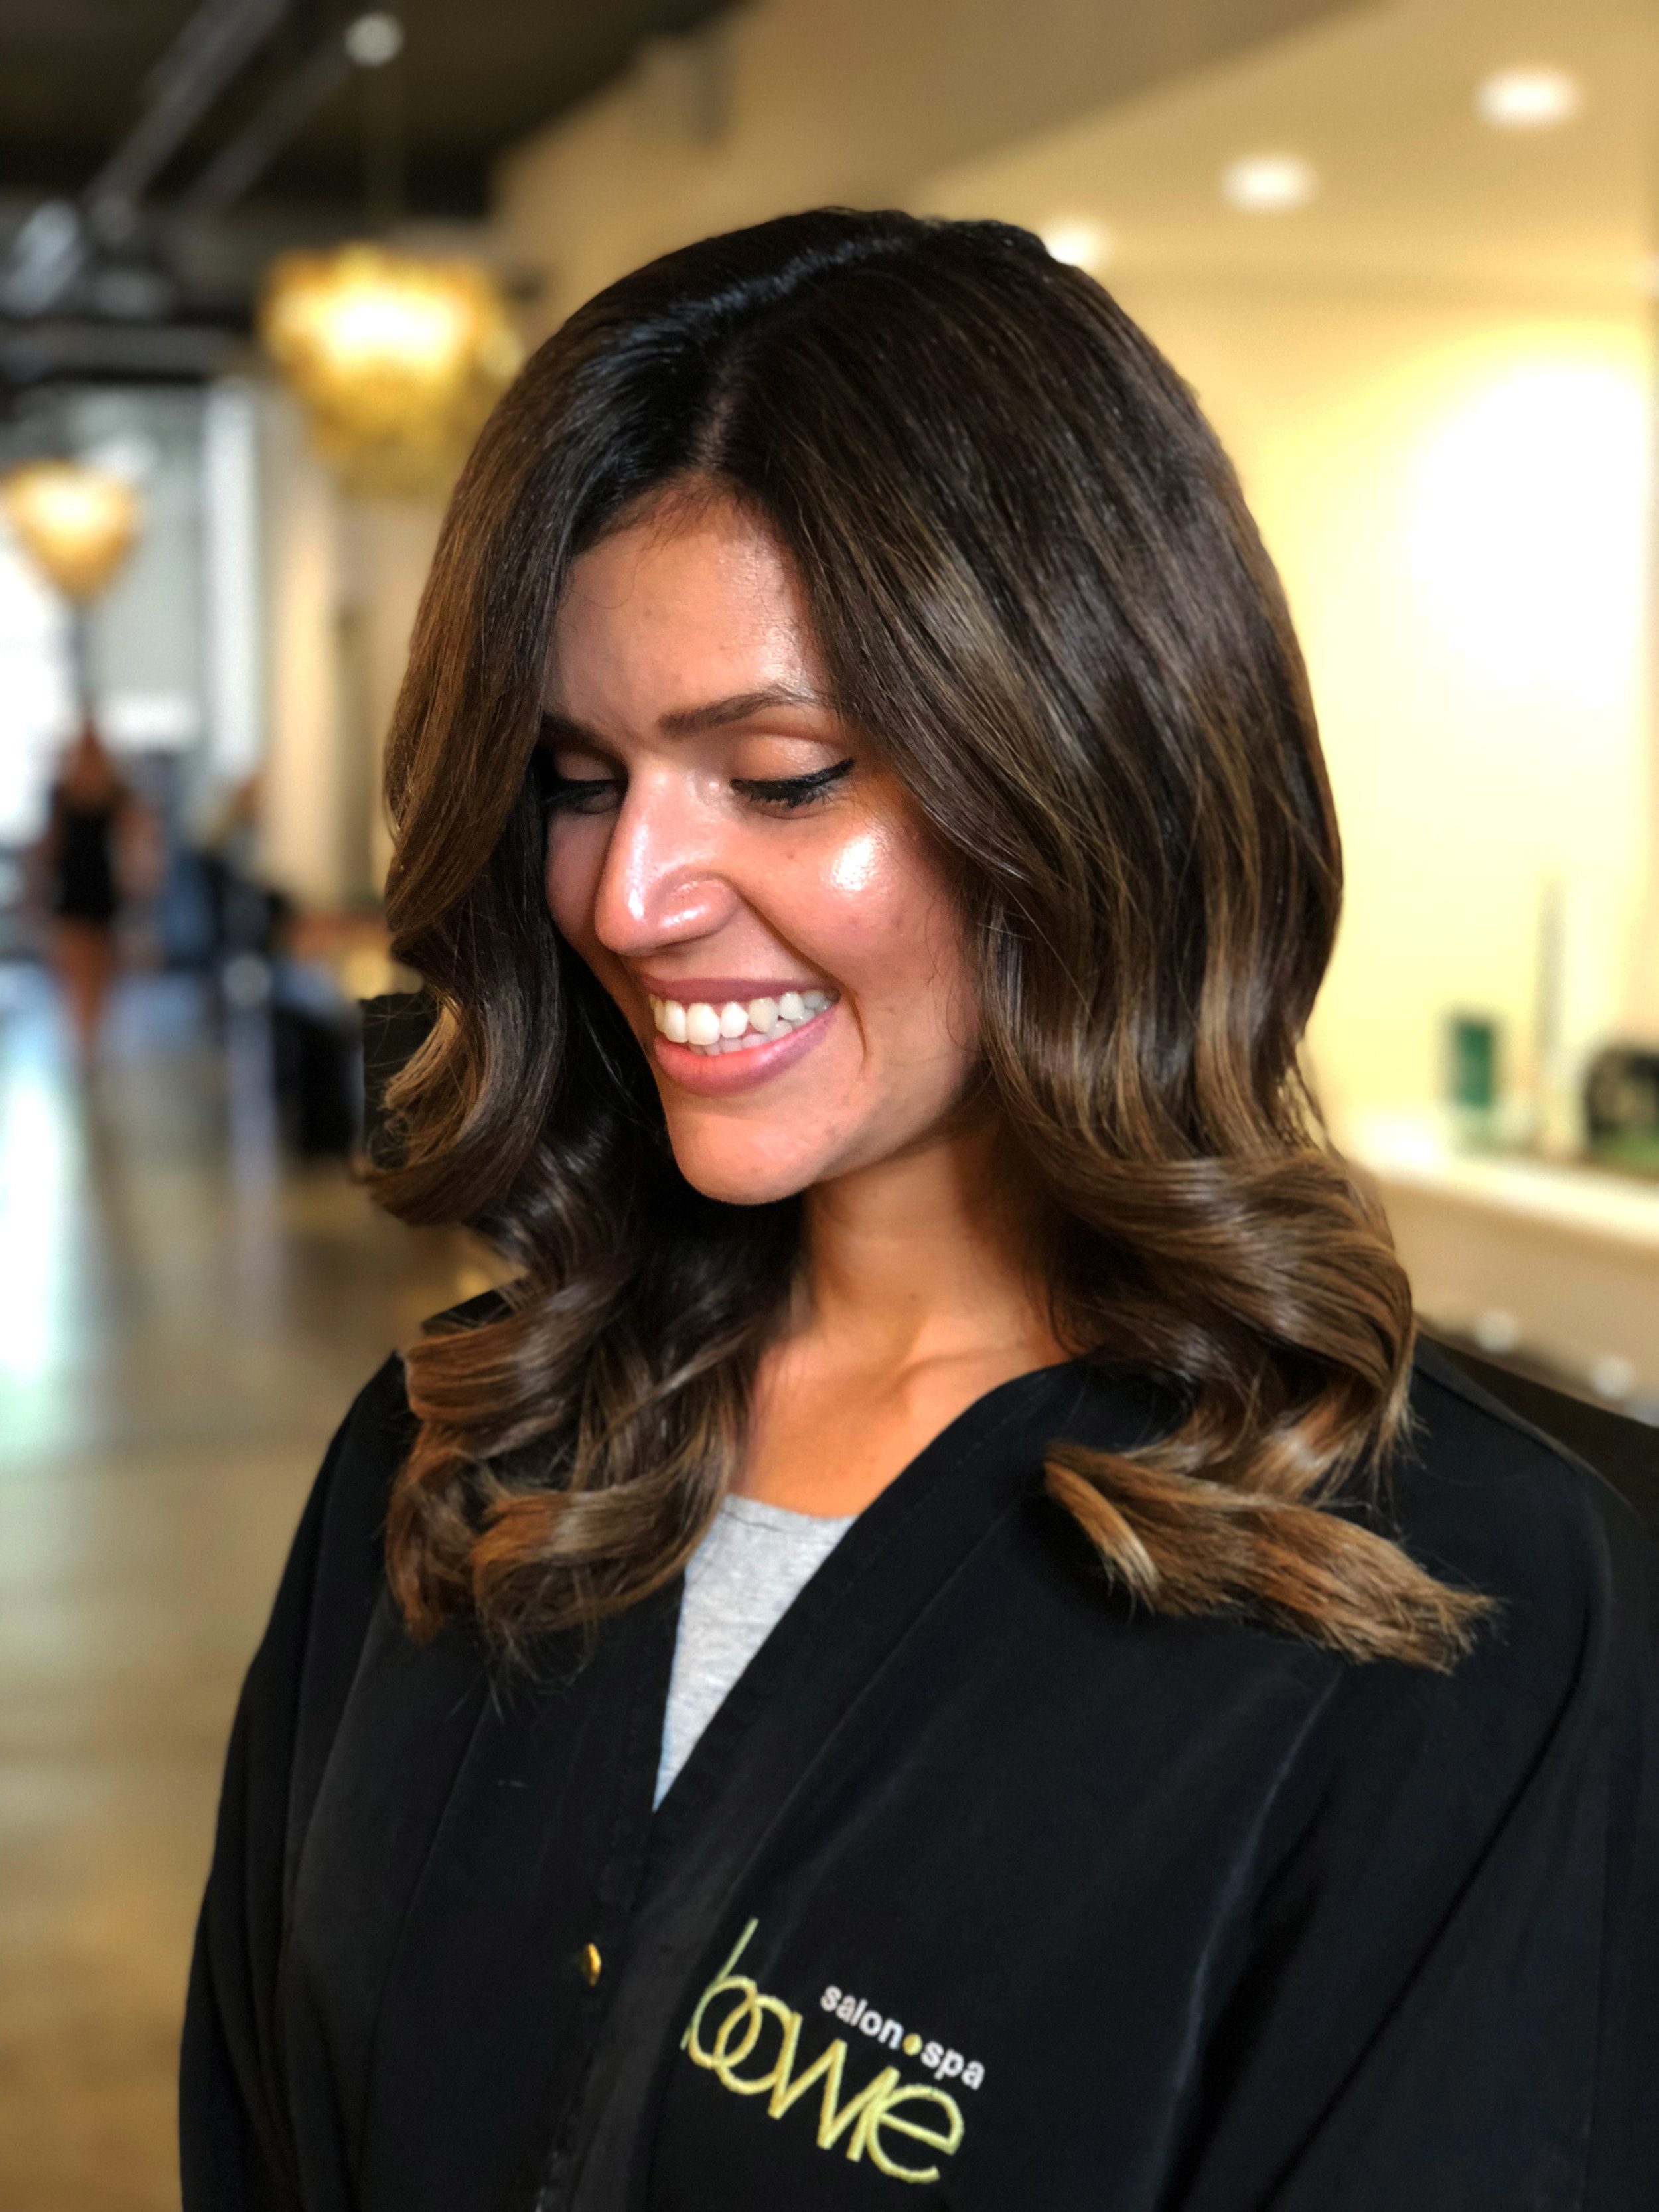 Smiles in the salon, Kerastase Masque, Bowie Salon and Spa